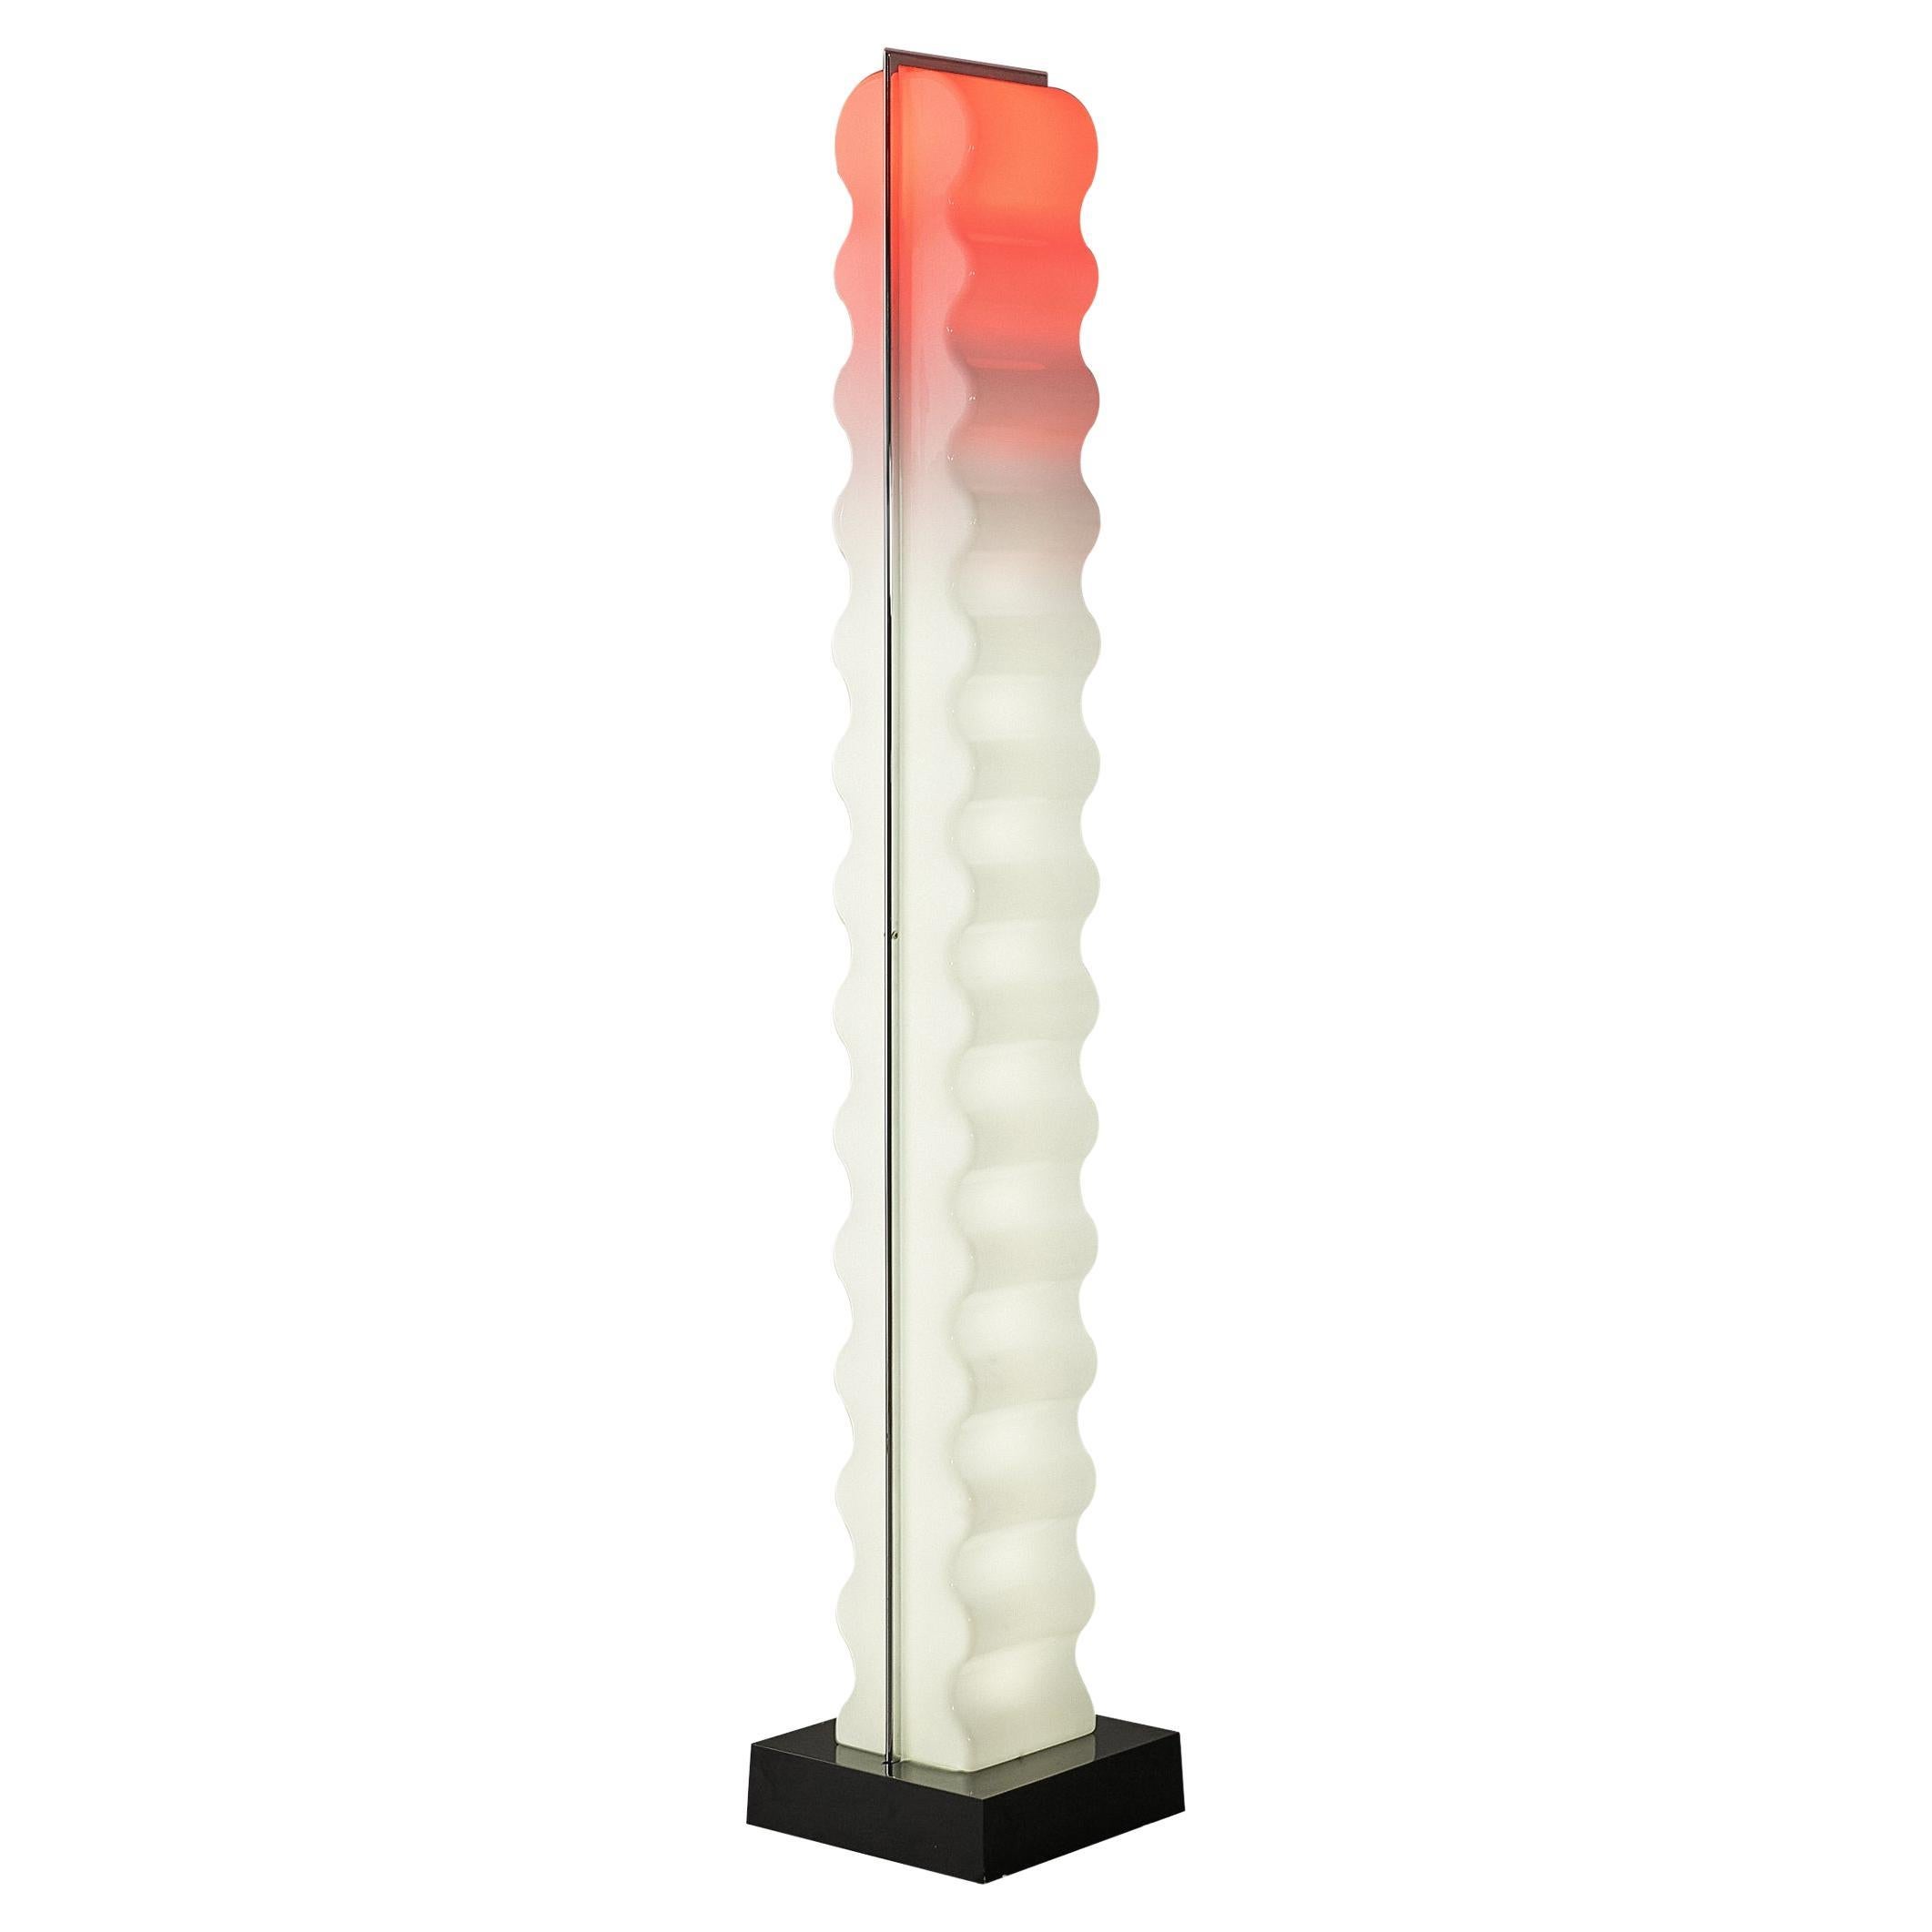 Ettore Sottsass for Poltronova 'Cometa' Floor Lamp in Perspex and Aluminum  For Sale